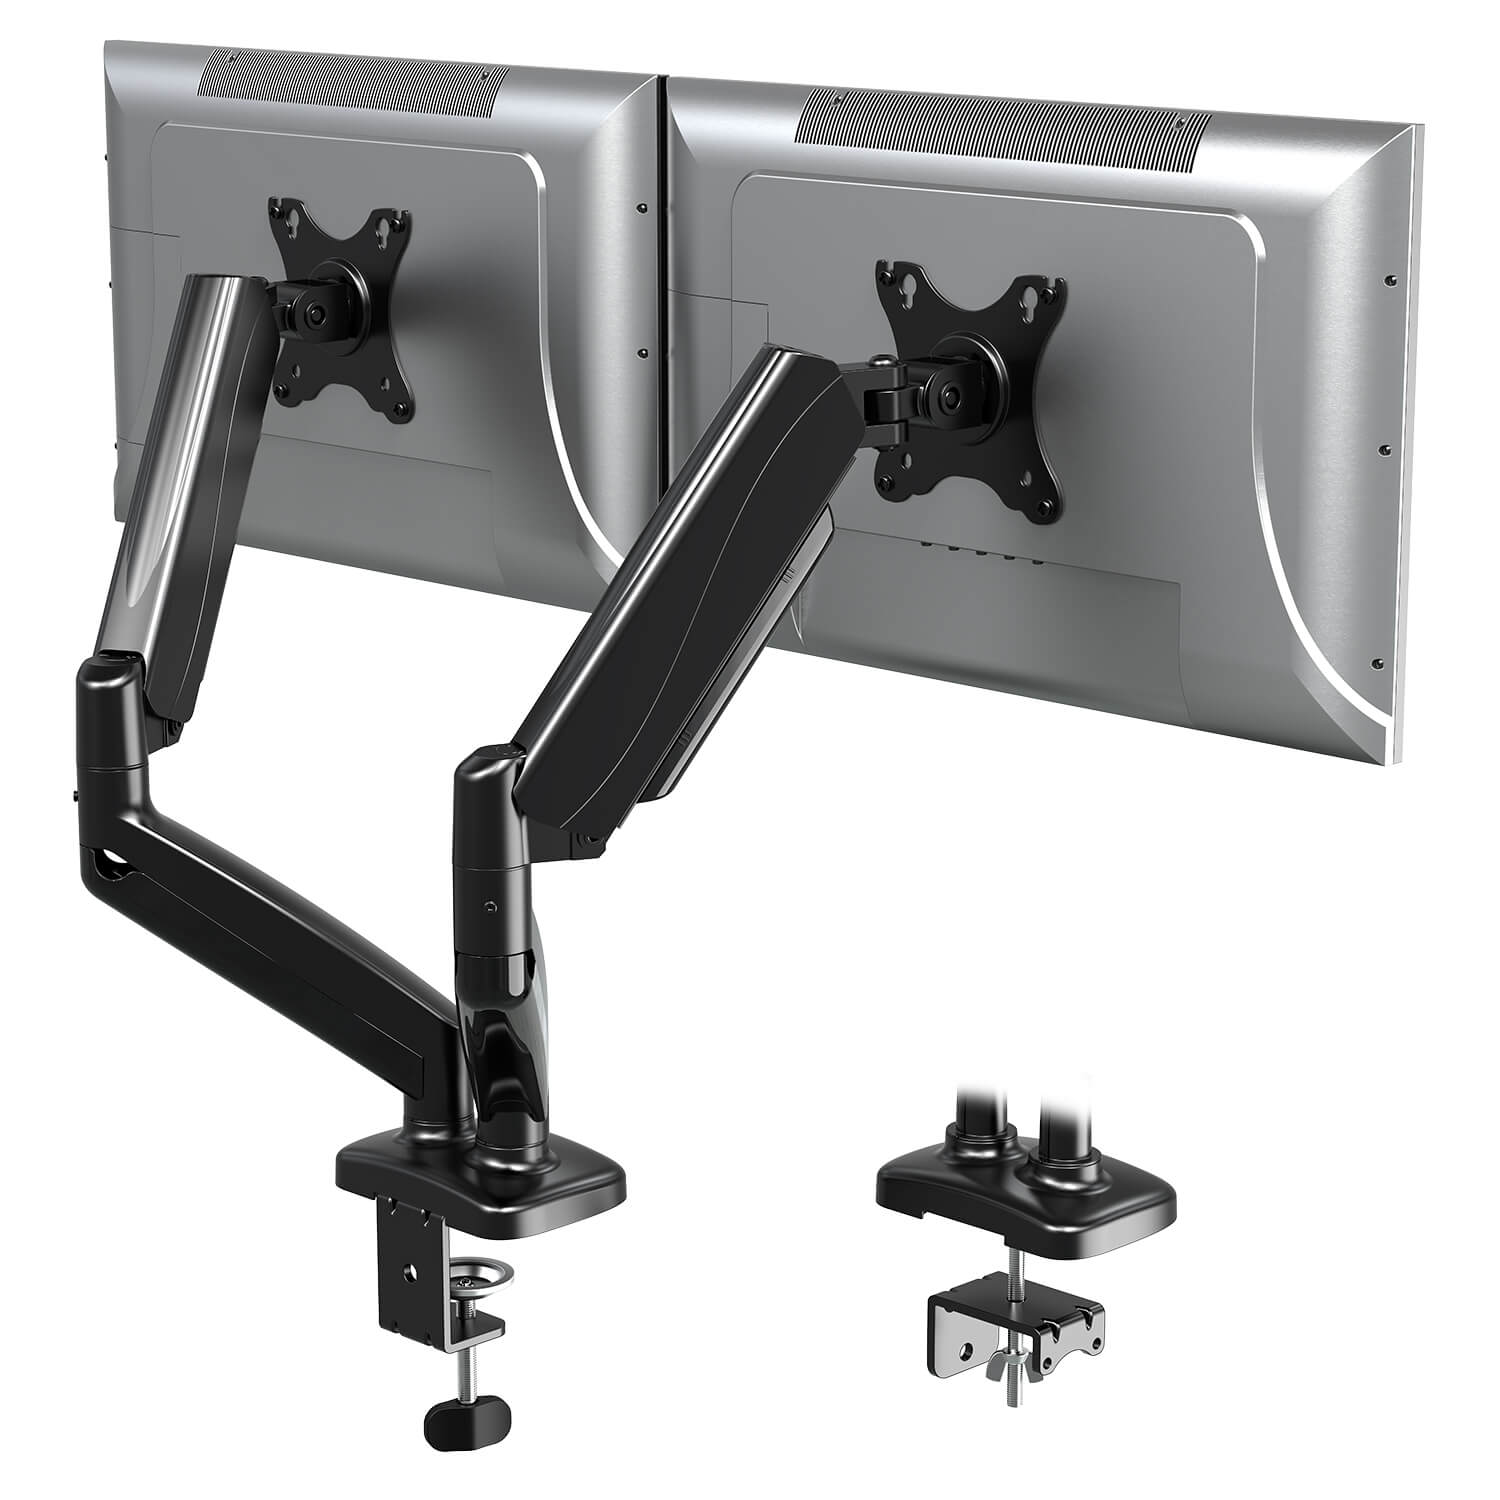 MOUNTUP Dual Monitor Desk Mount for Max 32'' Monitors